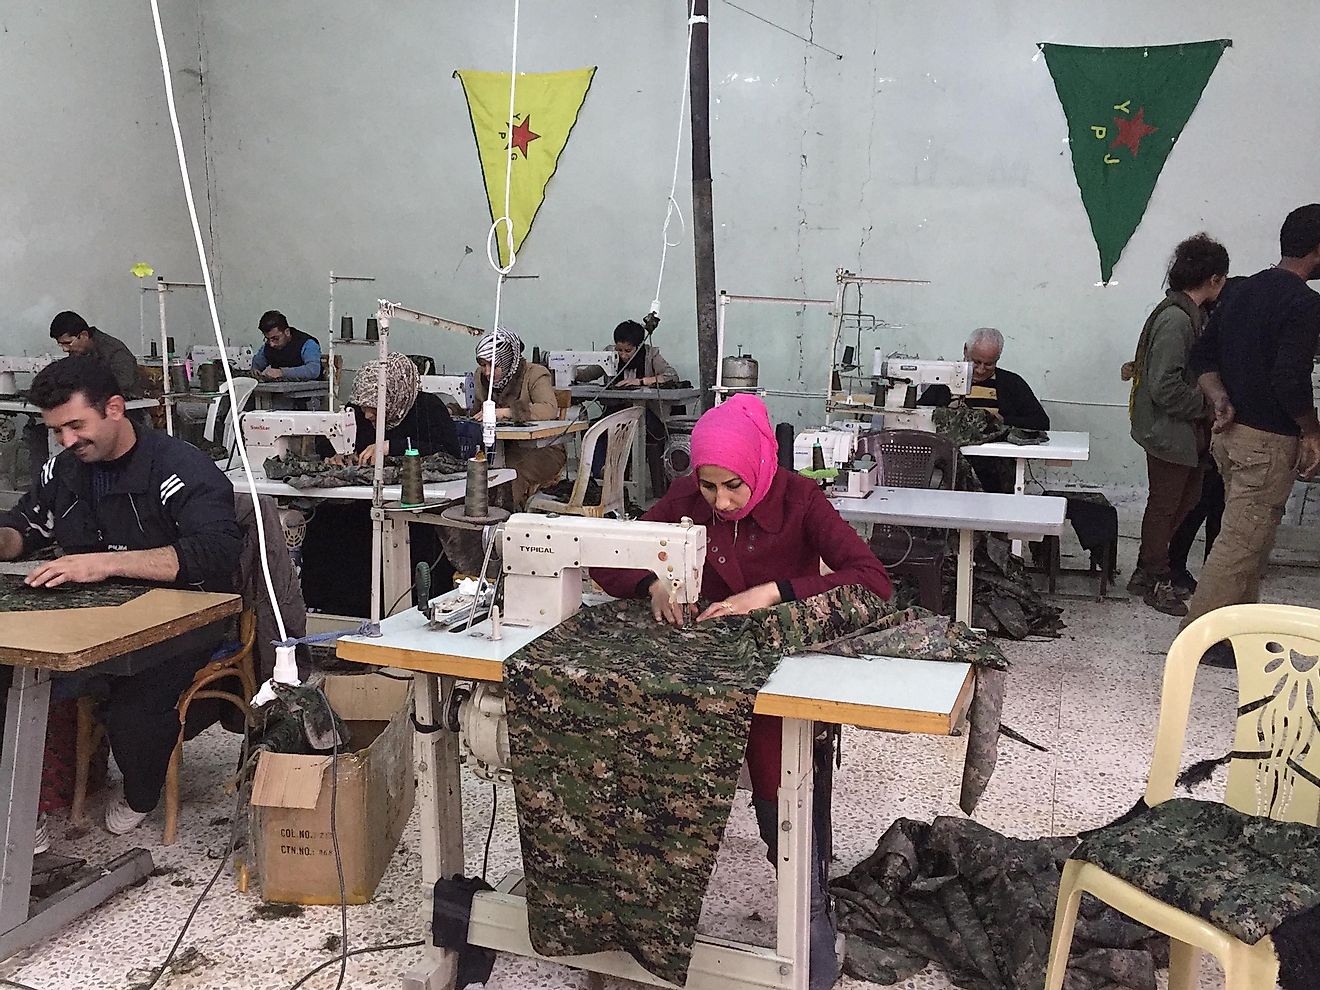 Syrian men and women sewing garments at a cooperative for workers.